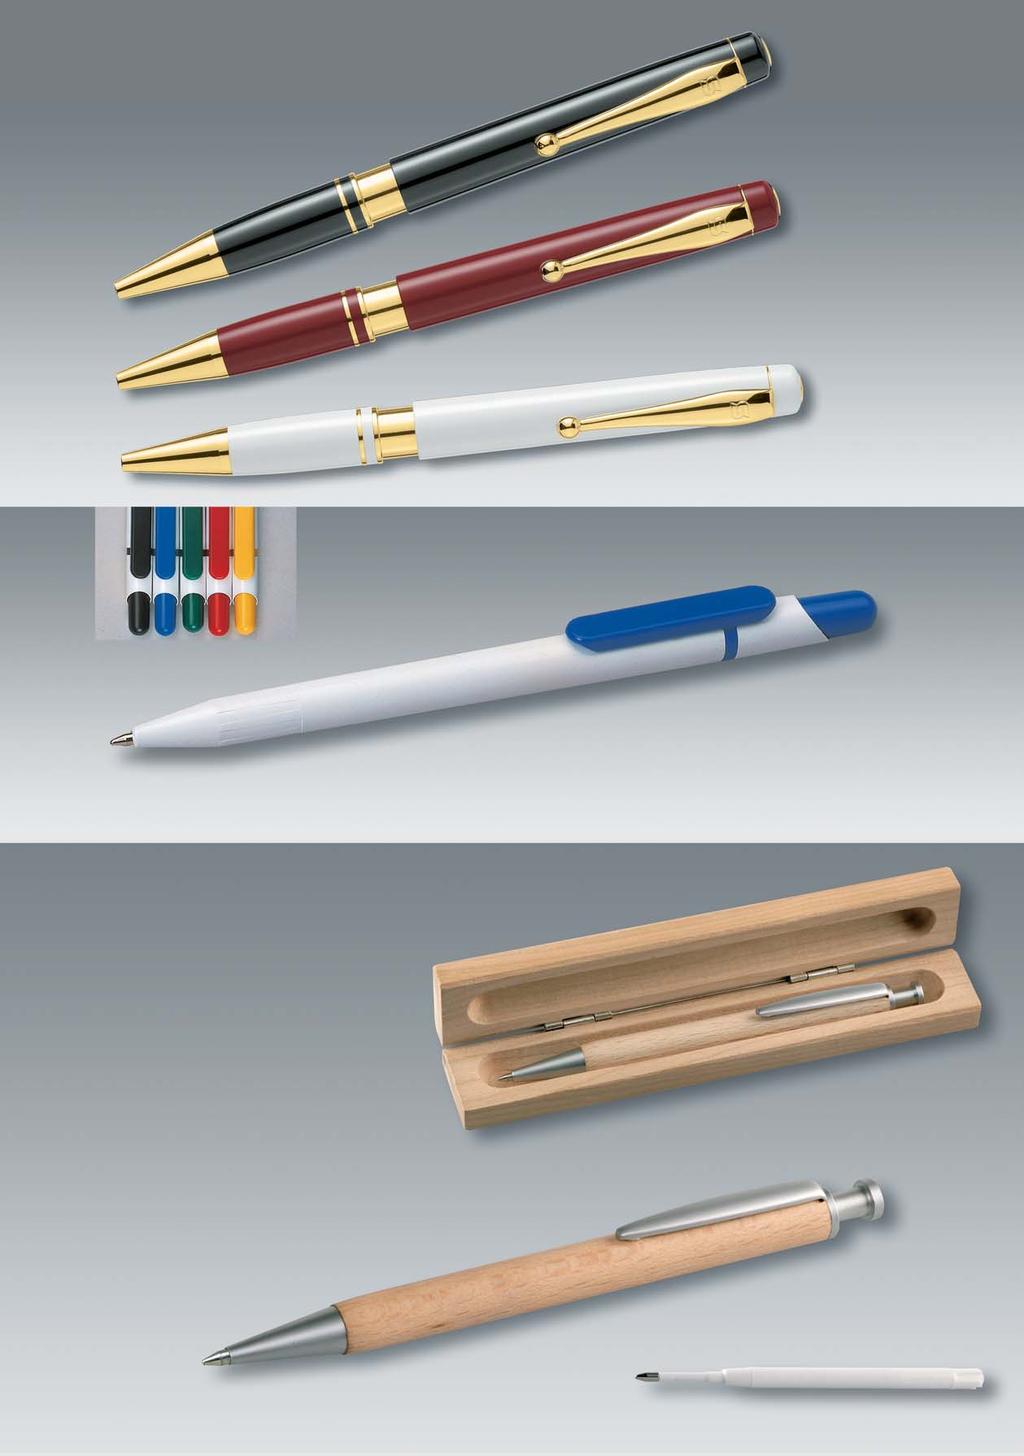 Plastik 180 cap-action plastic ballpoint pen with golden metal applications, super-longtime plastic refill G1, blue ink colors available: black, white, burgundy advertising: d and g new version